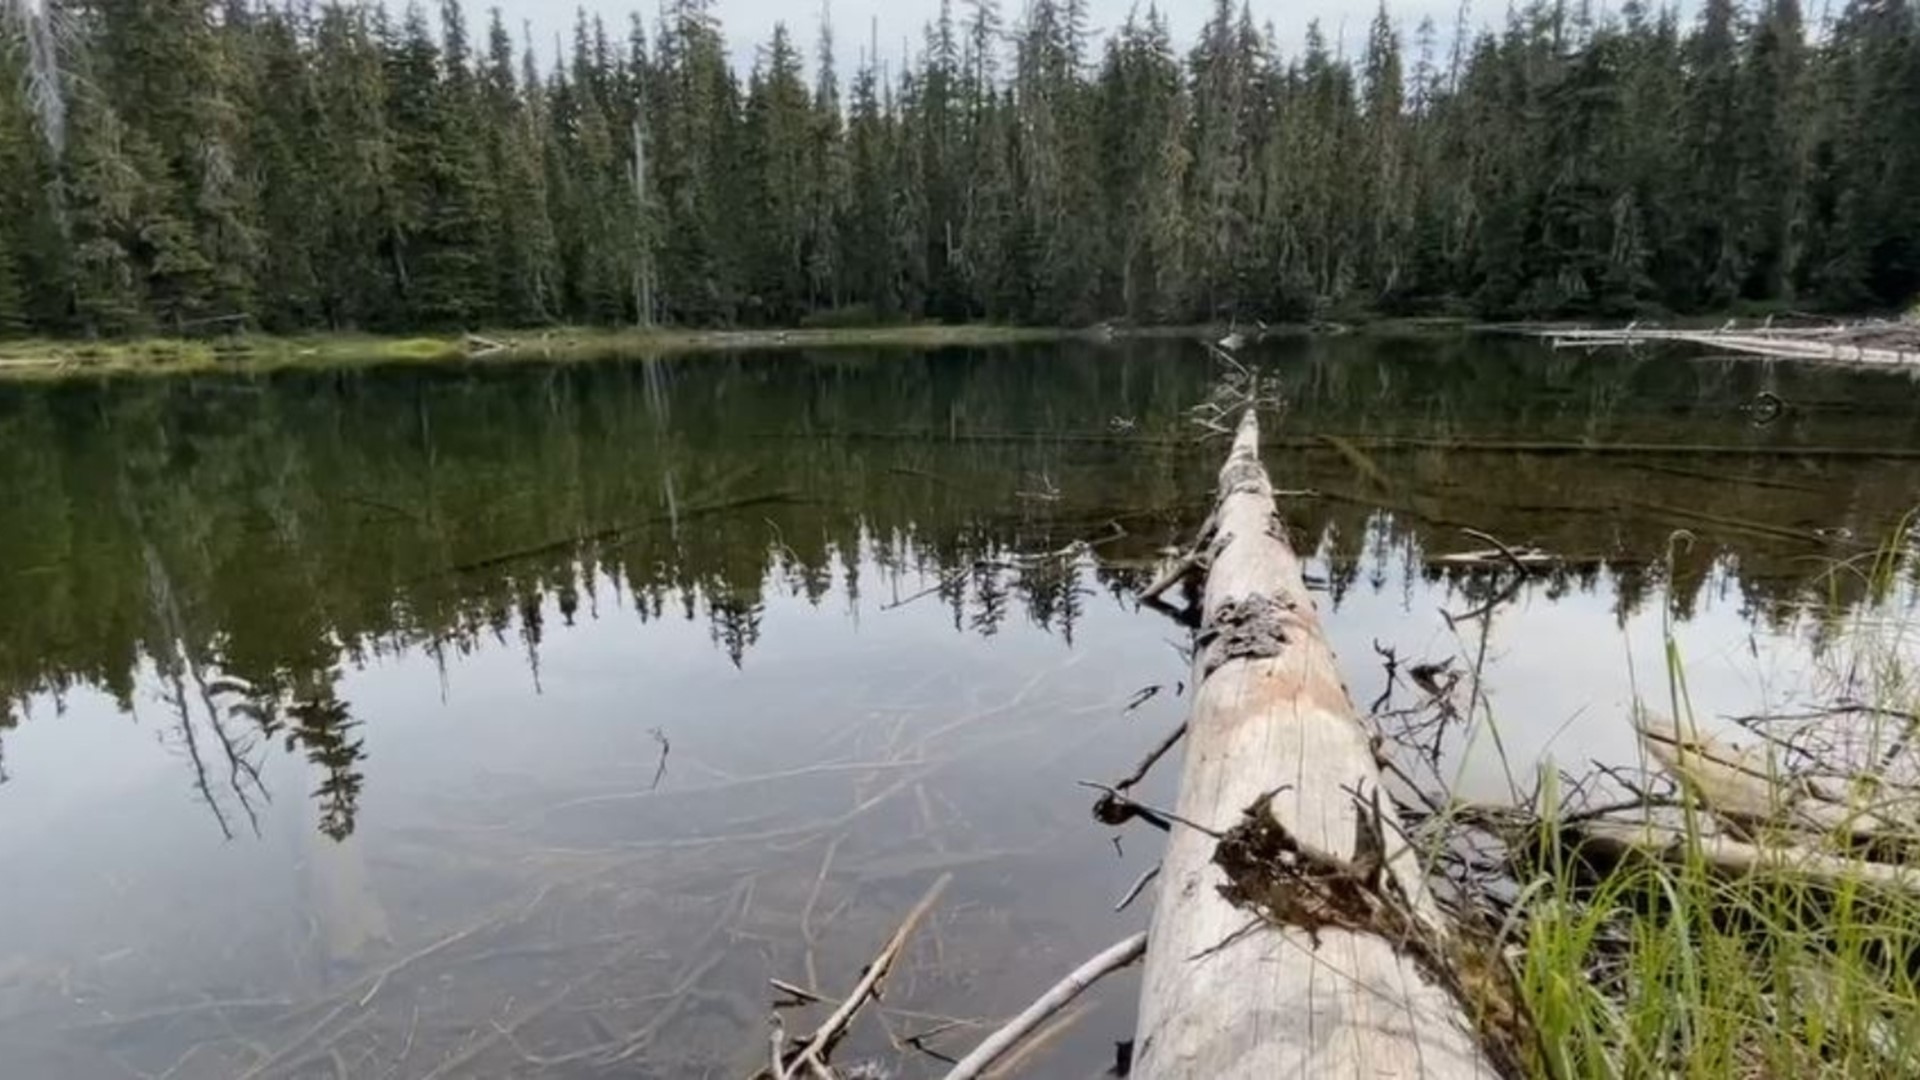 The latest What's in a Name? is about a lake in the High Cascades with a funny name. Devon Haskins went fishing for answers as to why it's called Boo Boo Lake.